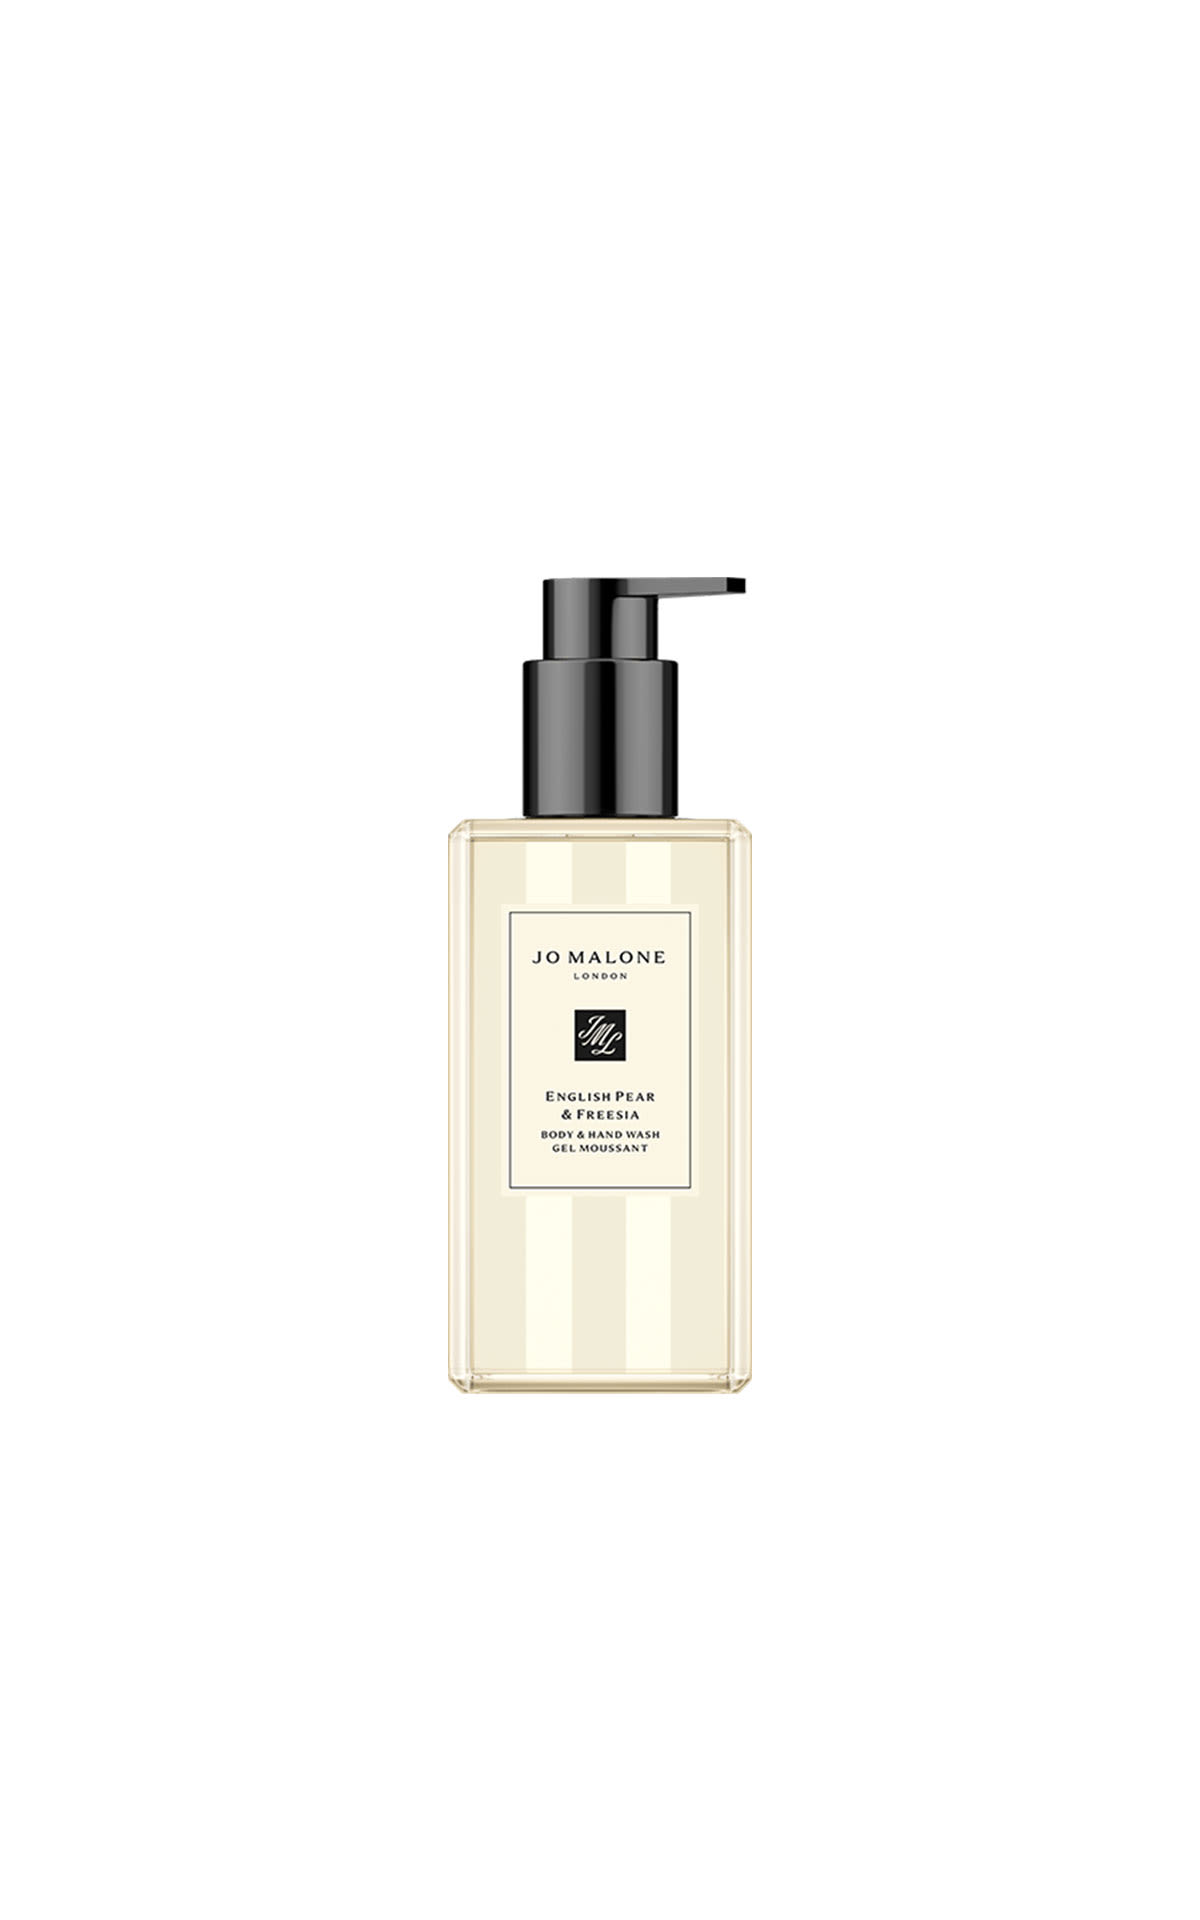 Jo Malone English pear and freesia body and hand wash from Bicester Village